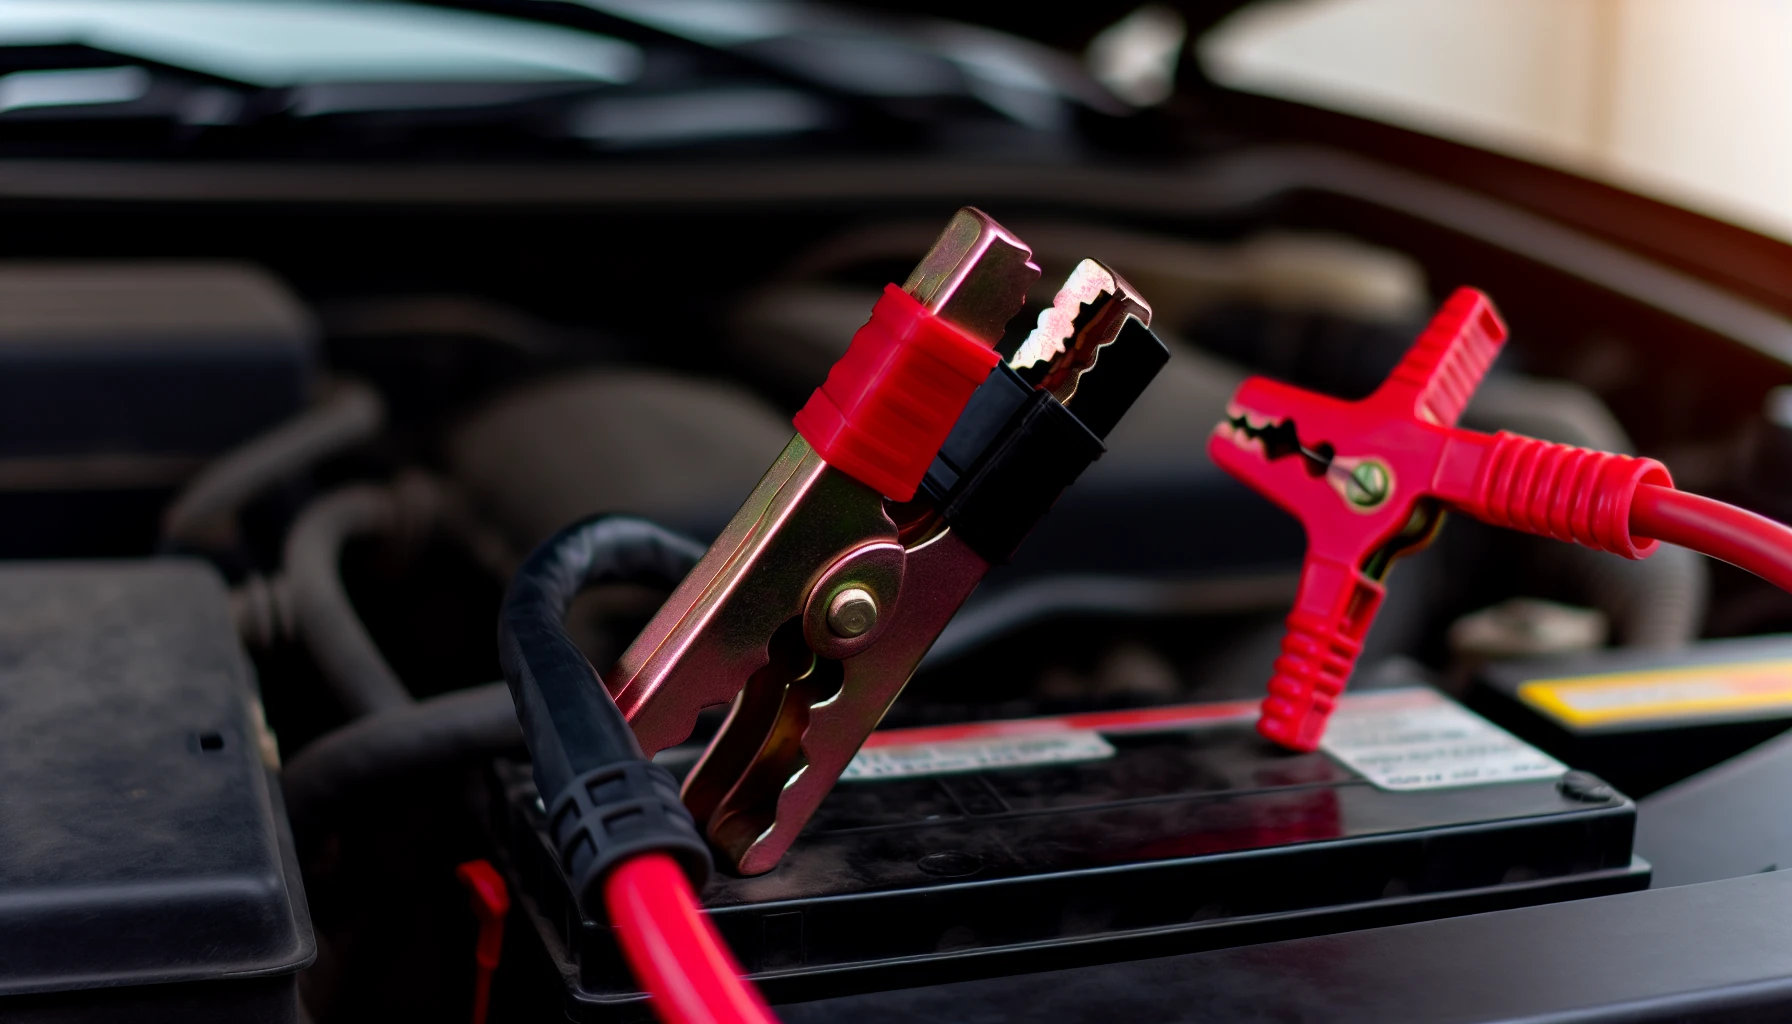 Connecting jumper cables to a car battery